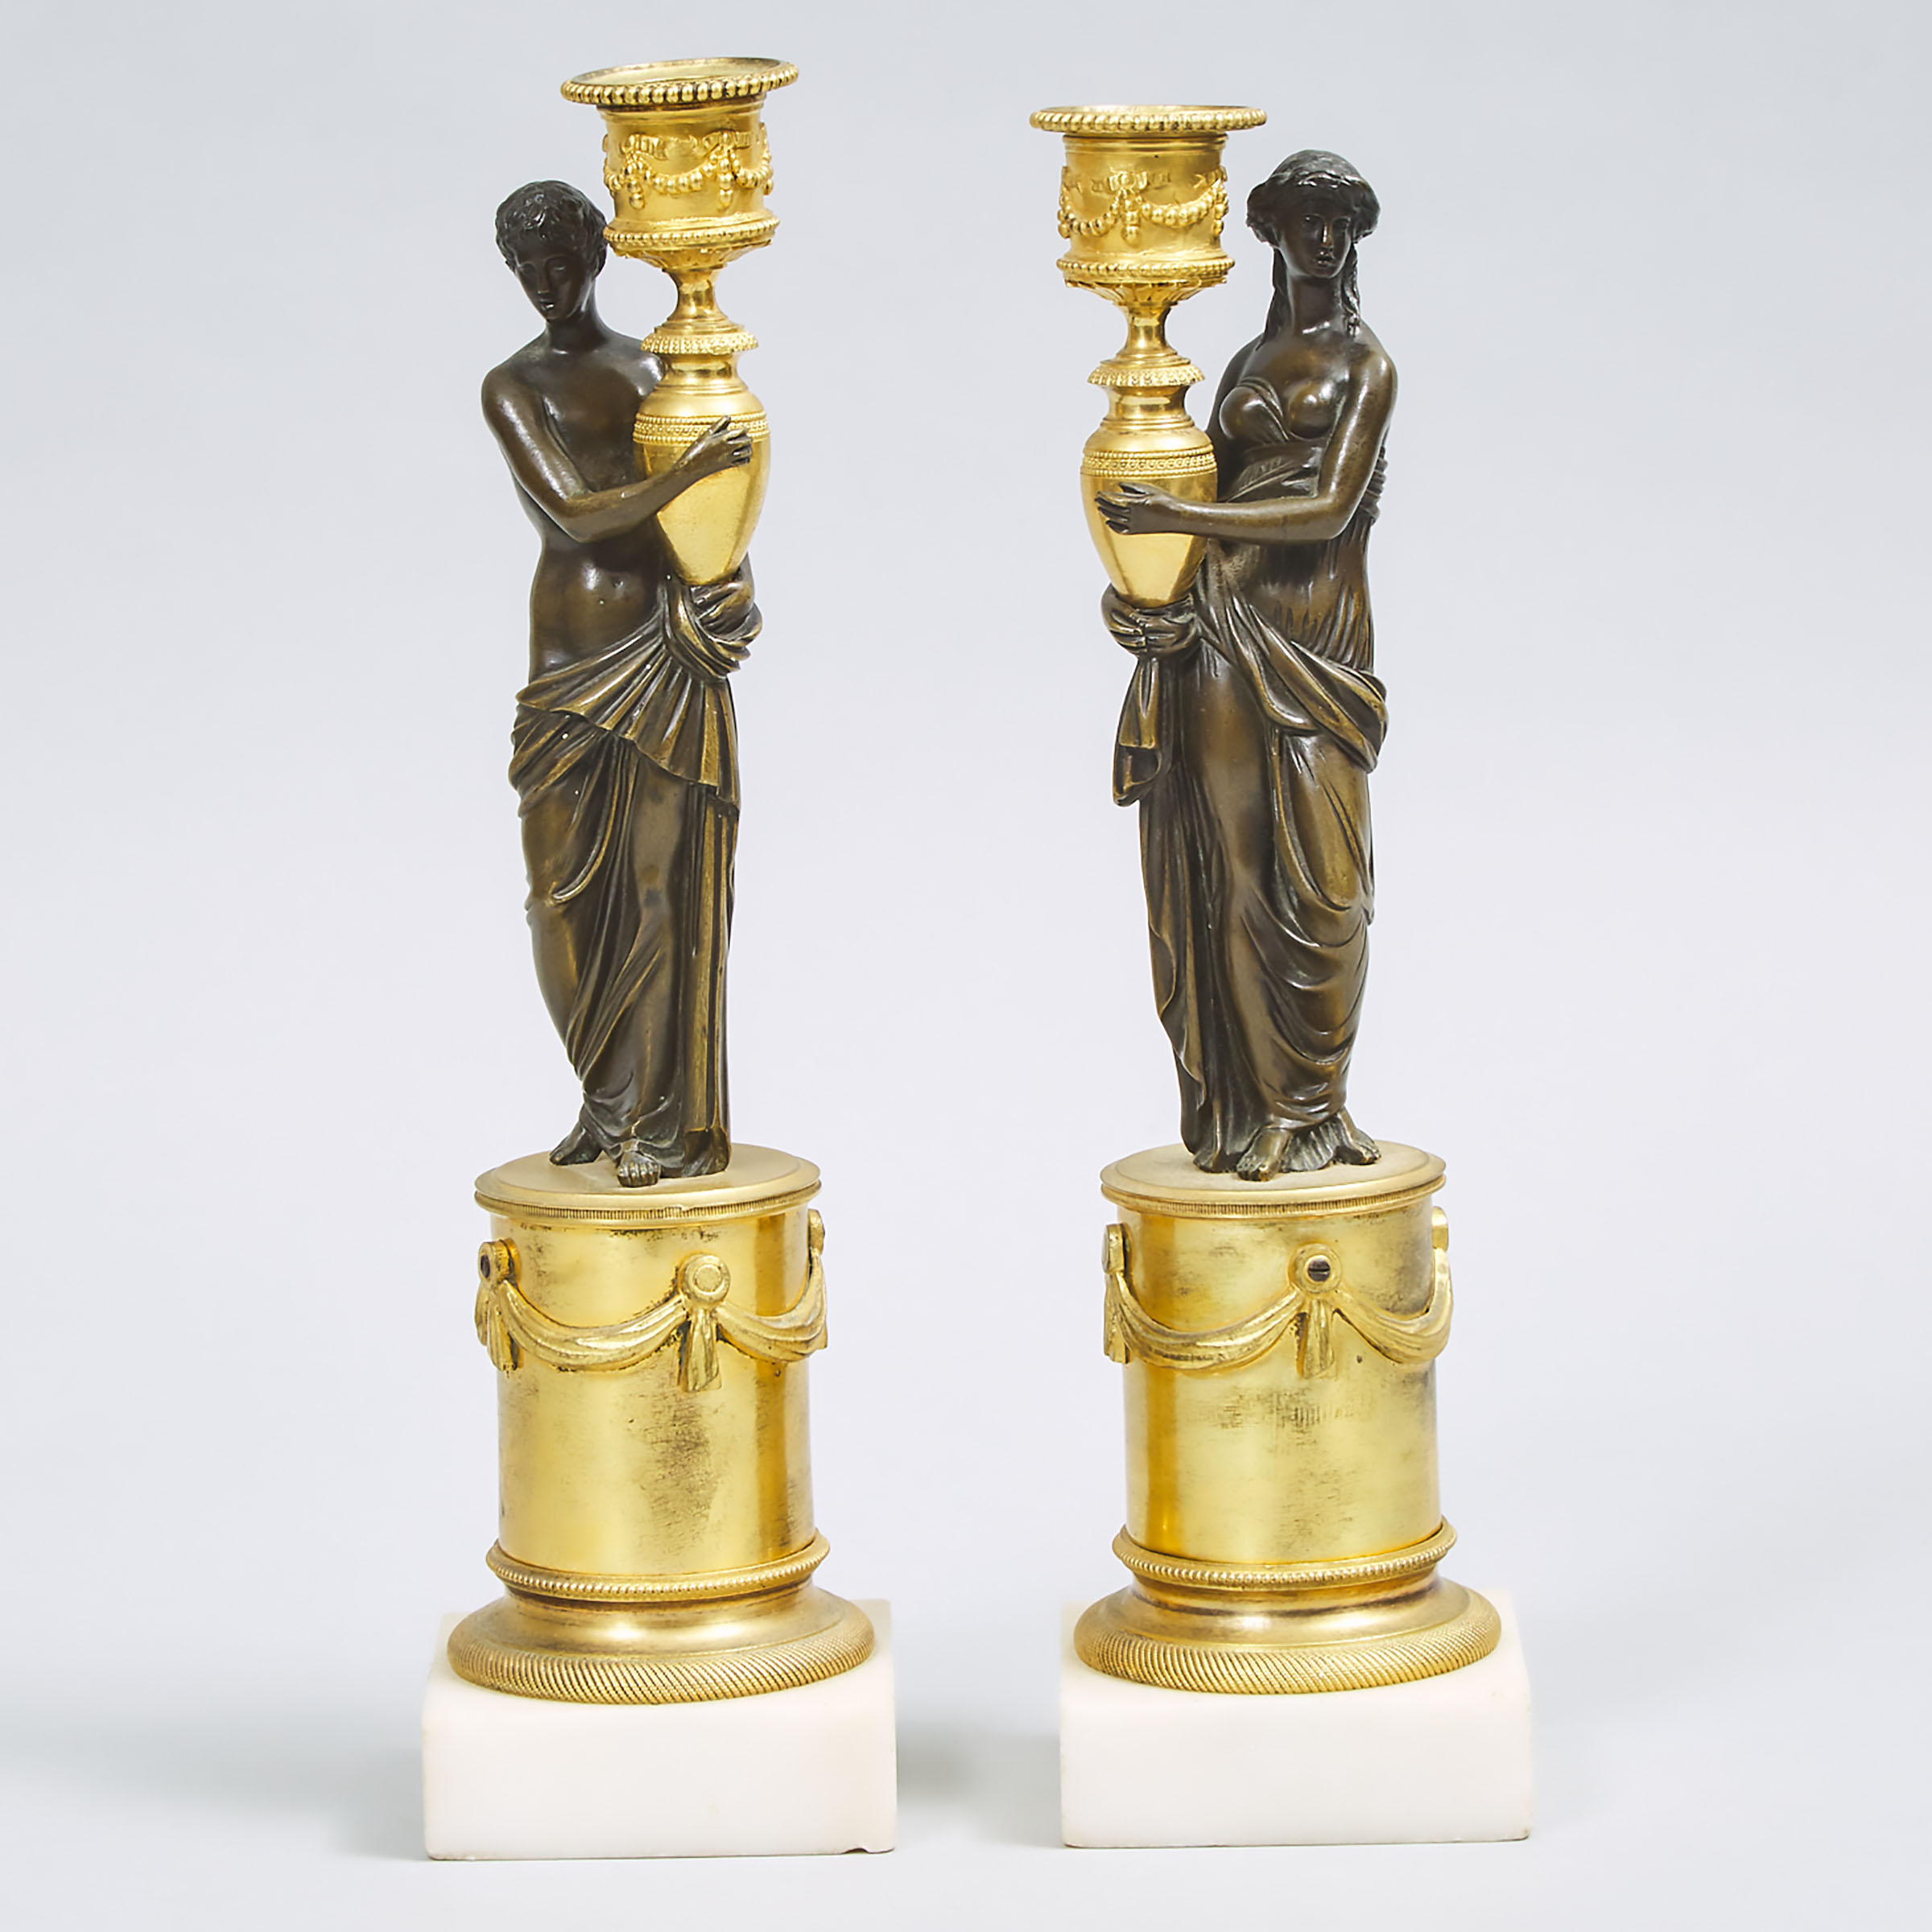 Pair of French Empire Style Gilt and Patinated Bronze Figural Candlesticks, eary 20th century